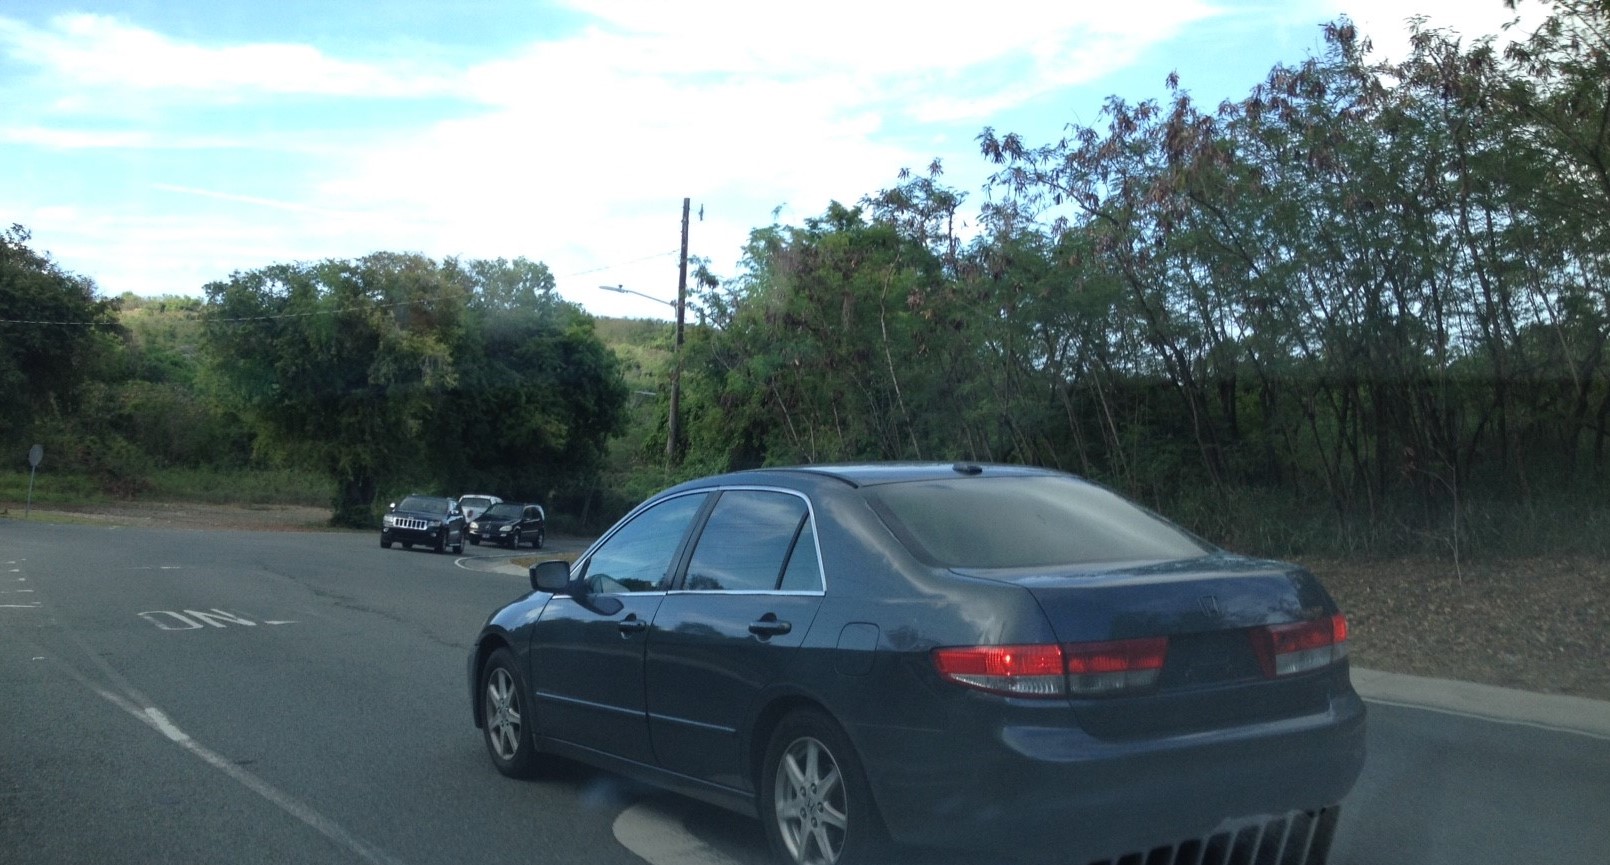 Are License Plates Required For Cars In The USVI? If You Can See, You'd Think Not